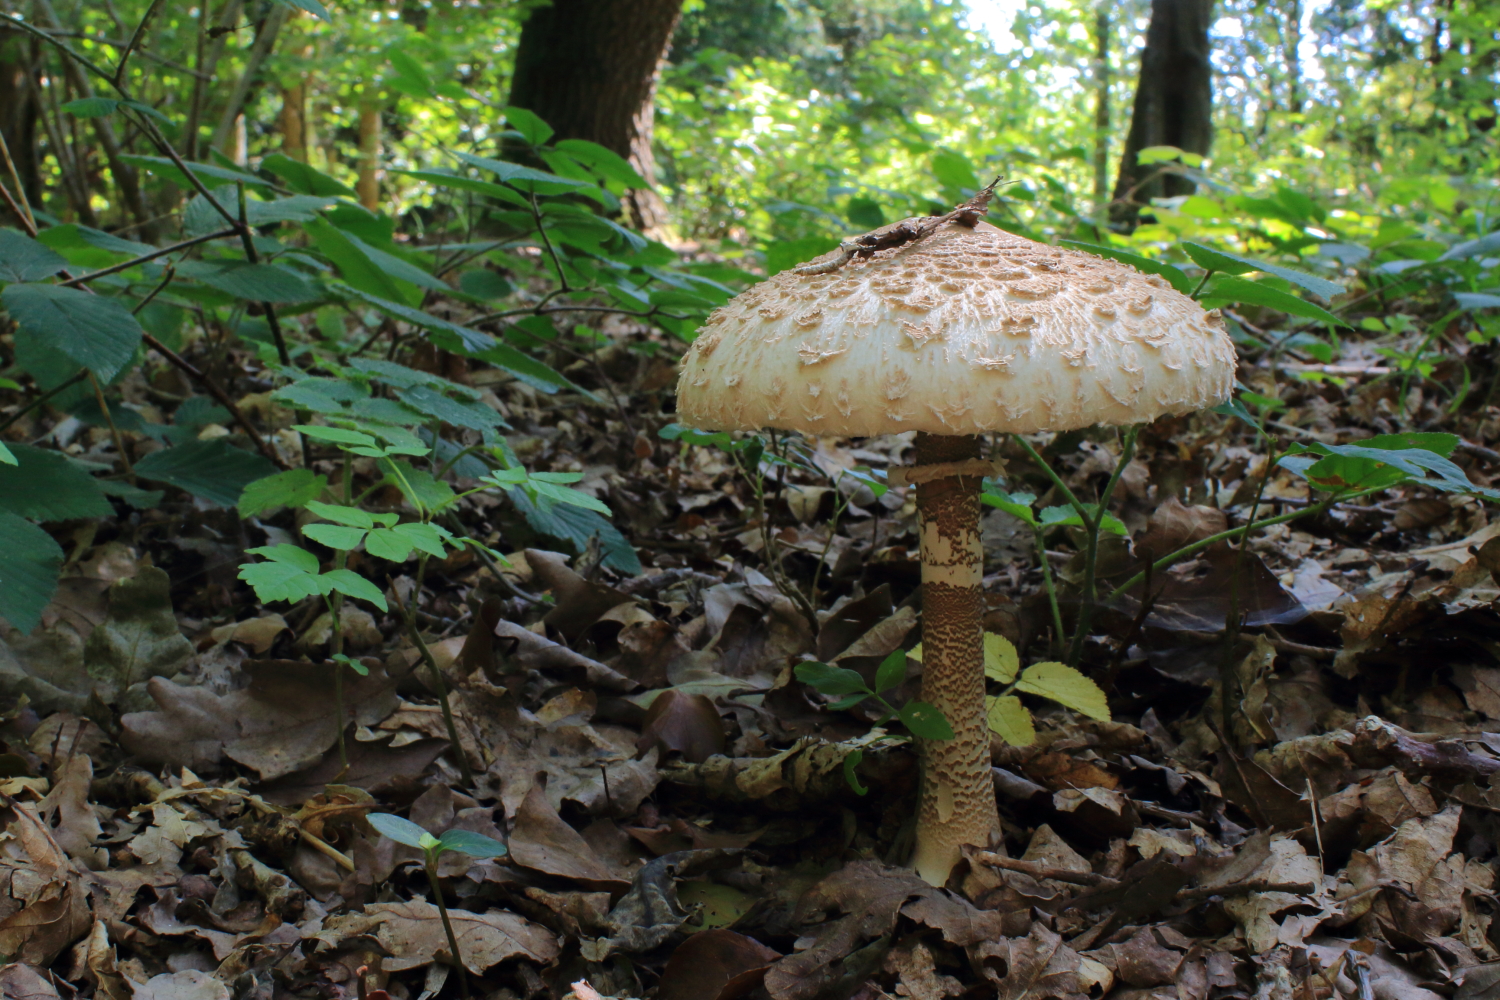 The Shaggy Parasol (Chlorophyllum rhacodes) possesses a long stalk and wide cap optimising it for spore production and dispersal, with a ring around its snakeskin stipe and floccose upperside to deter predators from getting to its gills.